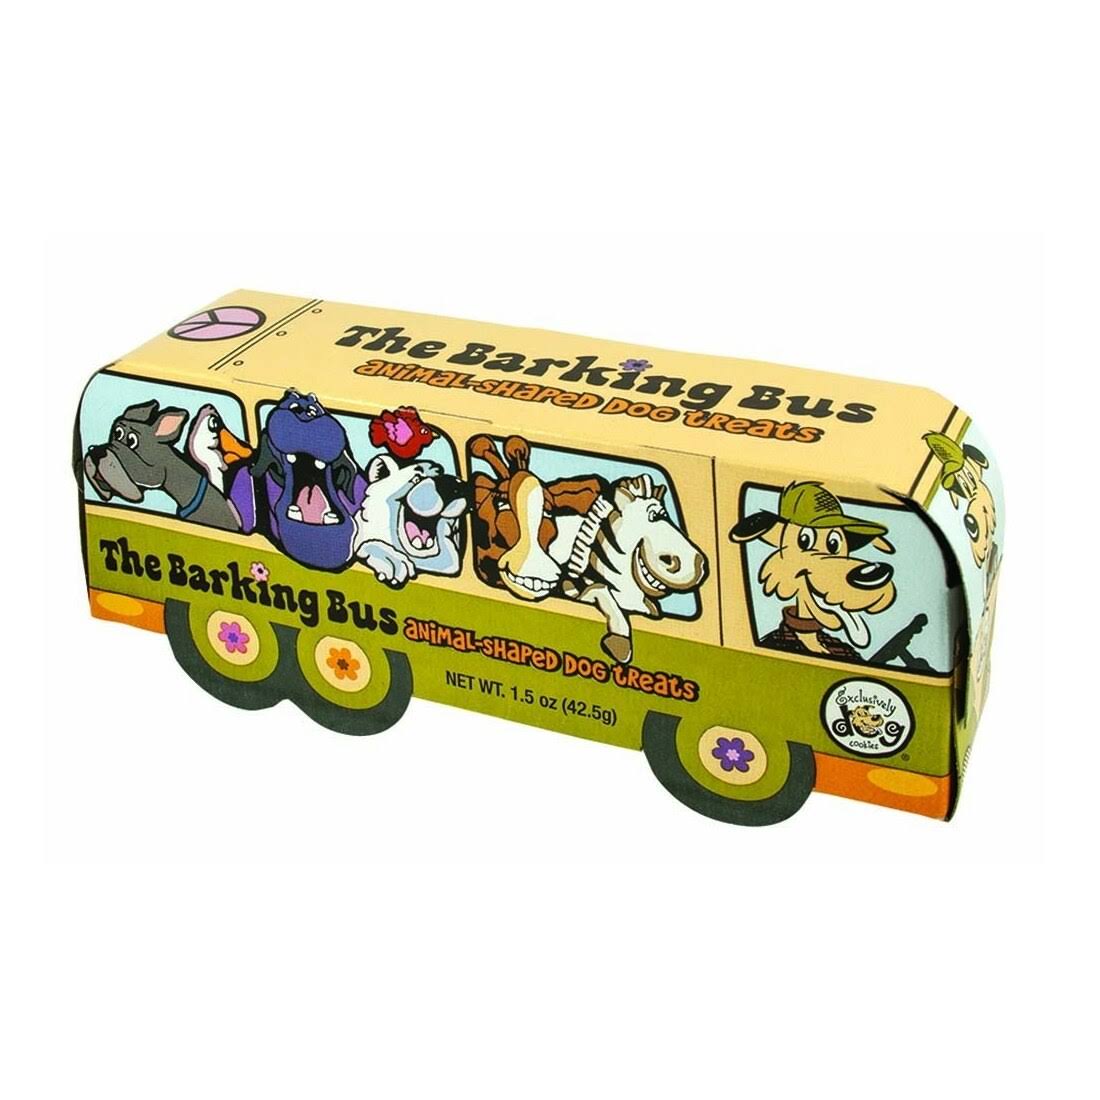 Exclusively Dog Cookies The Barking Bus Animal Shaped Dog Treats - 1.5oz